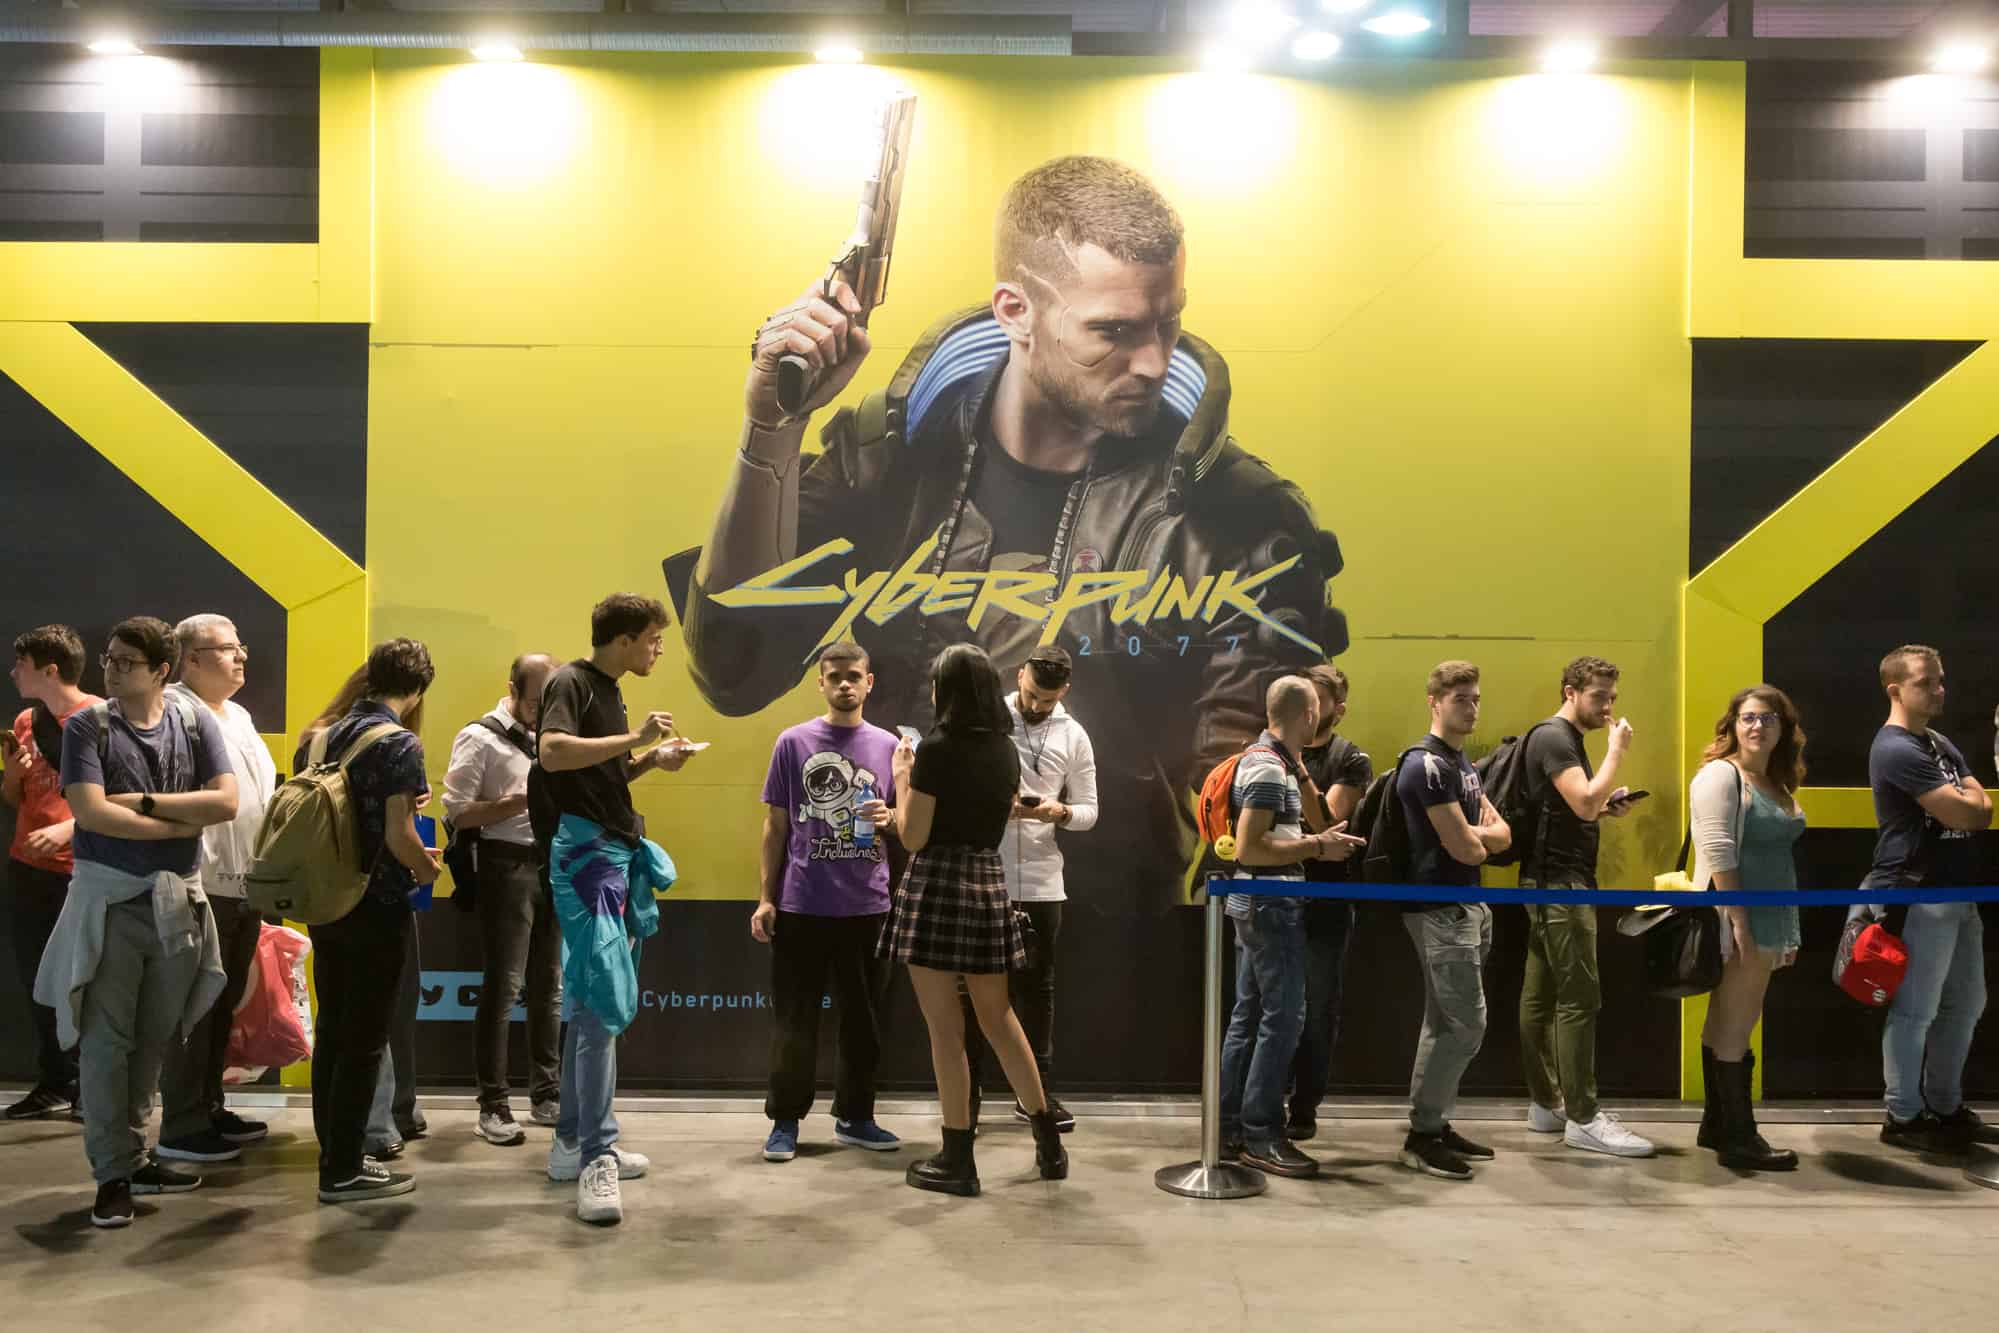 A queue for the Cyberpunk 2077 launch